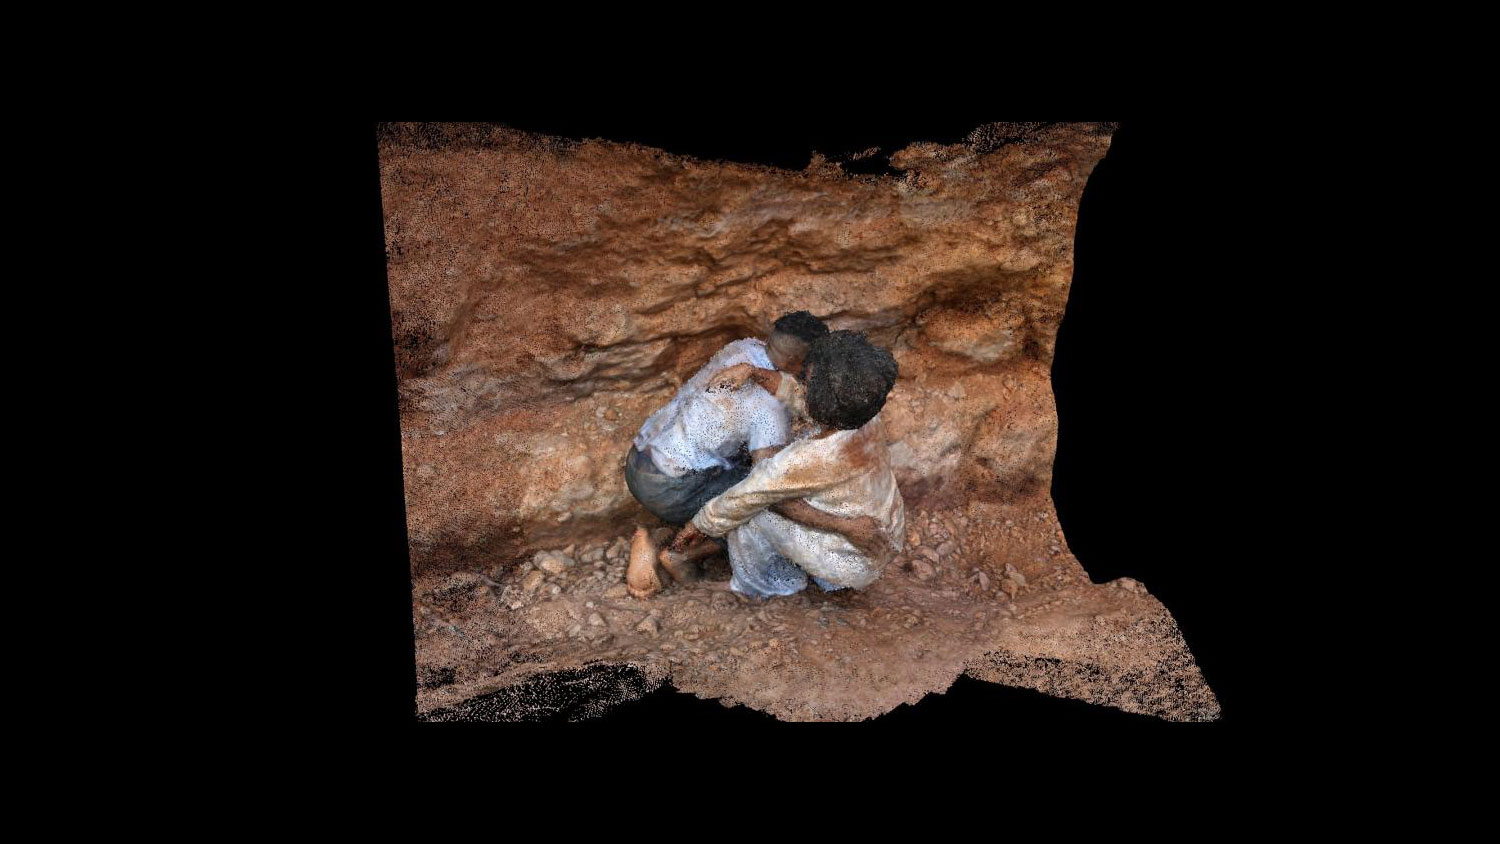 two black persons huddled together against a muddy cliff